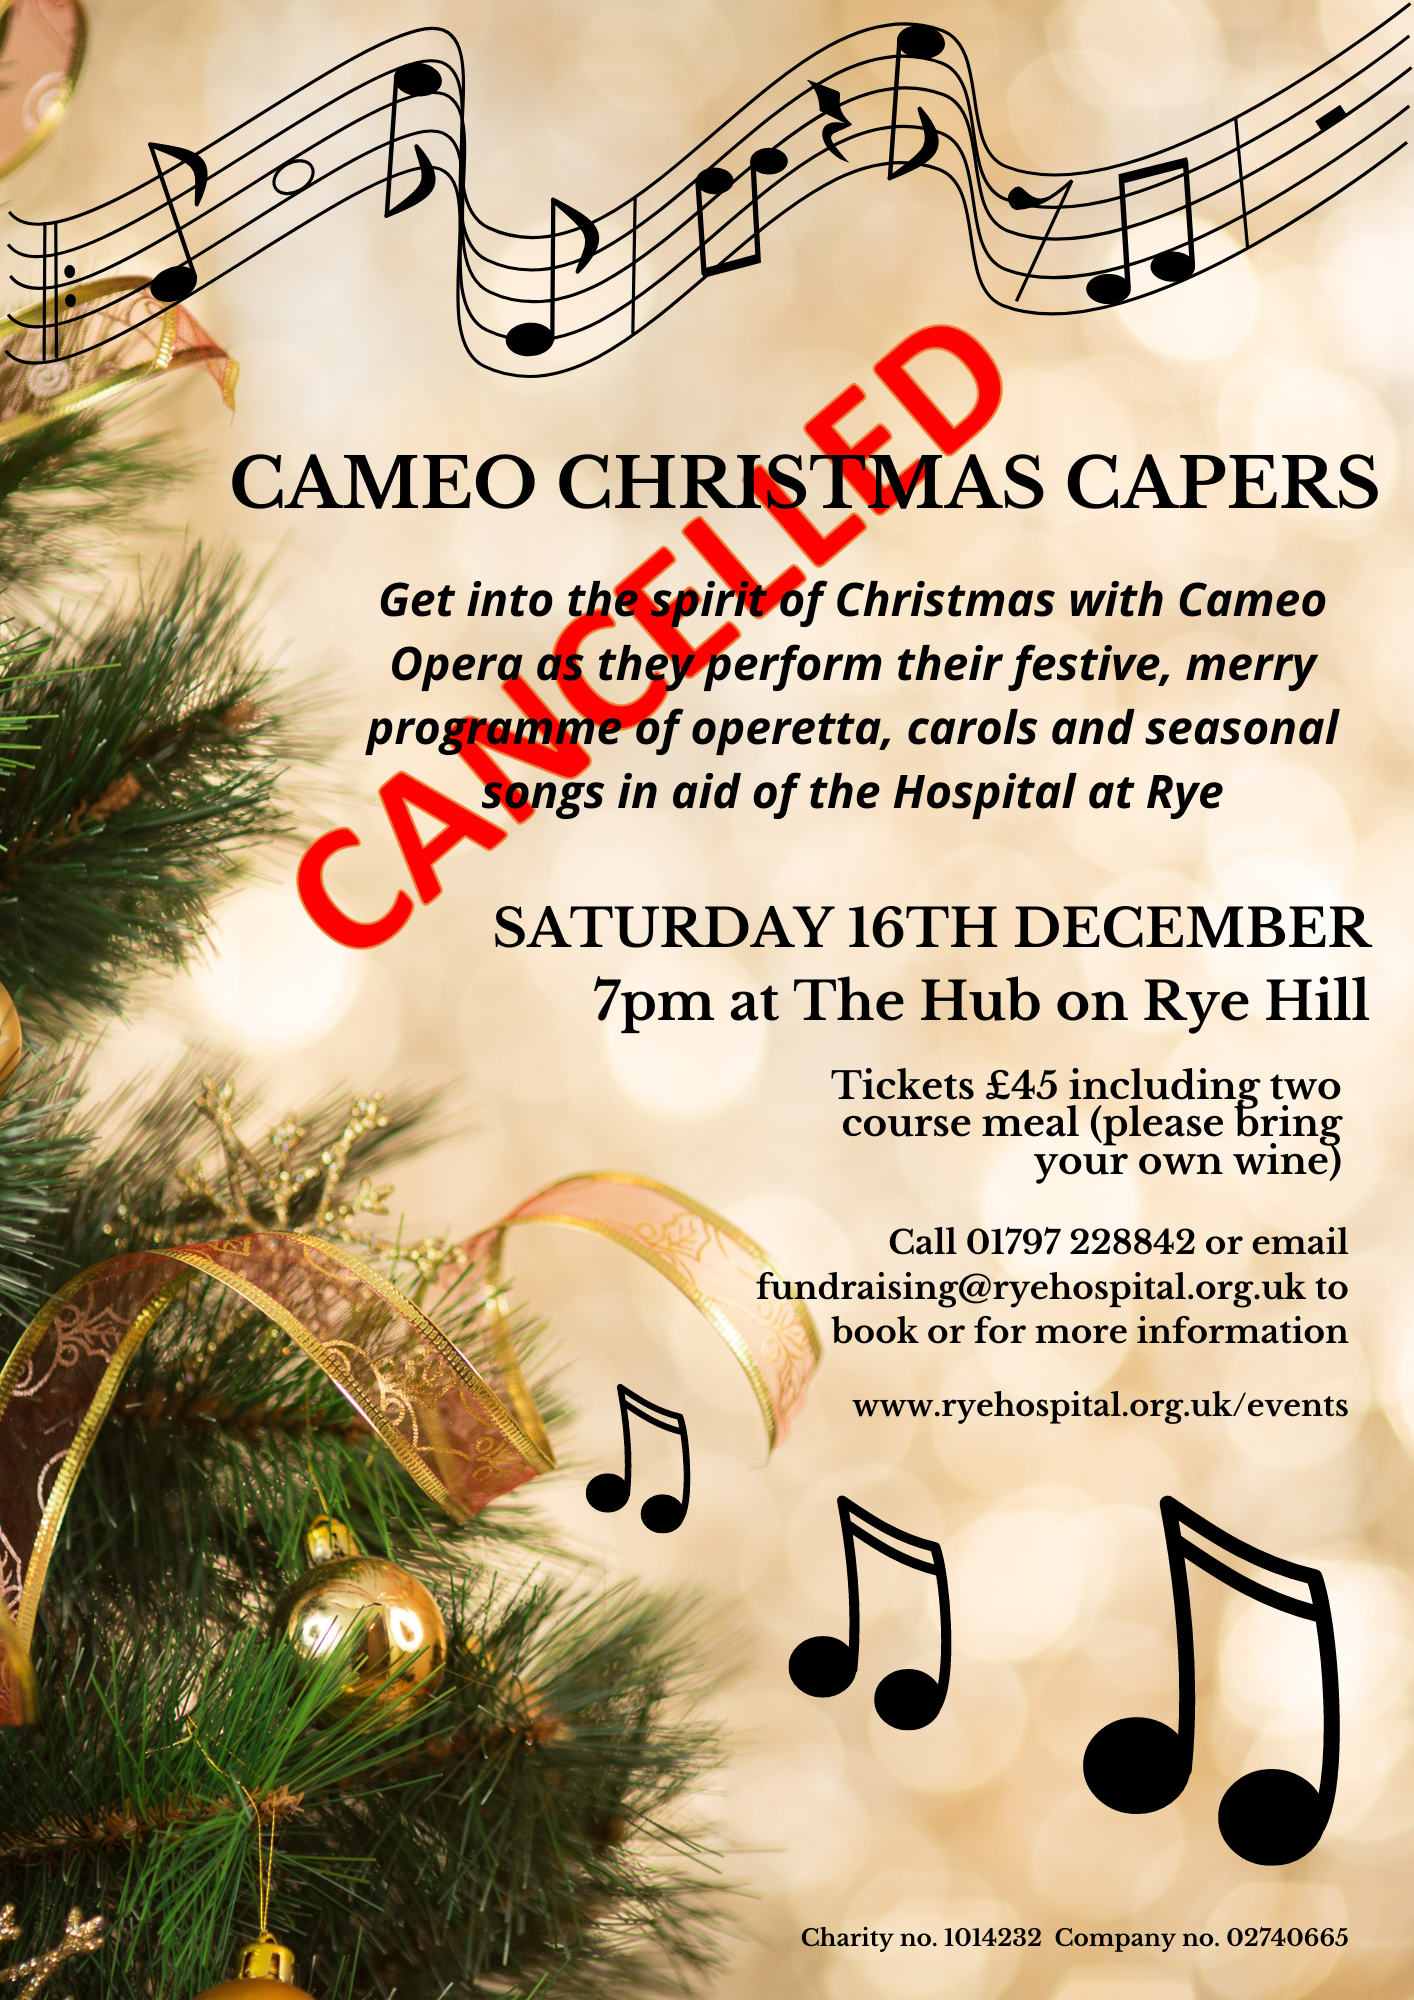 Cancellation notice for Cameo Christmas Capers